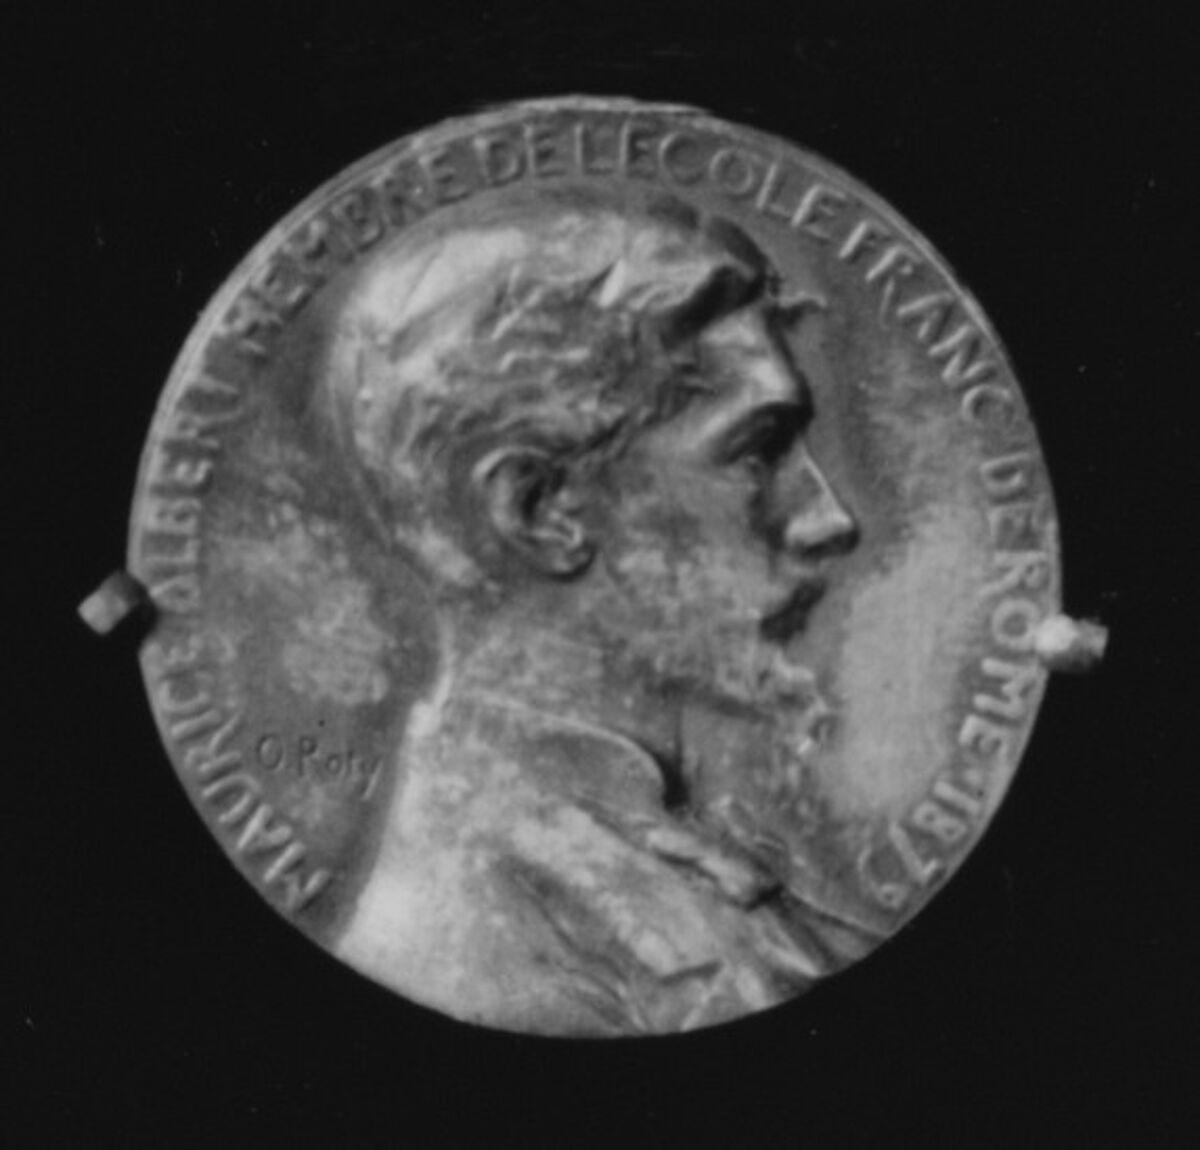 Maurice Albert, Member of the French School at Rome, 1879, Medalist: Louis-Oscar Roty (French, Paris 1846–1911 Paris), Silver, cast, French 